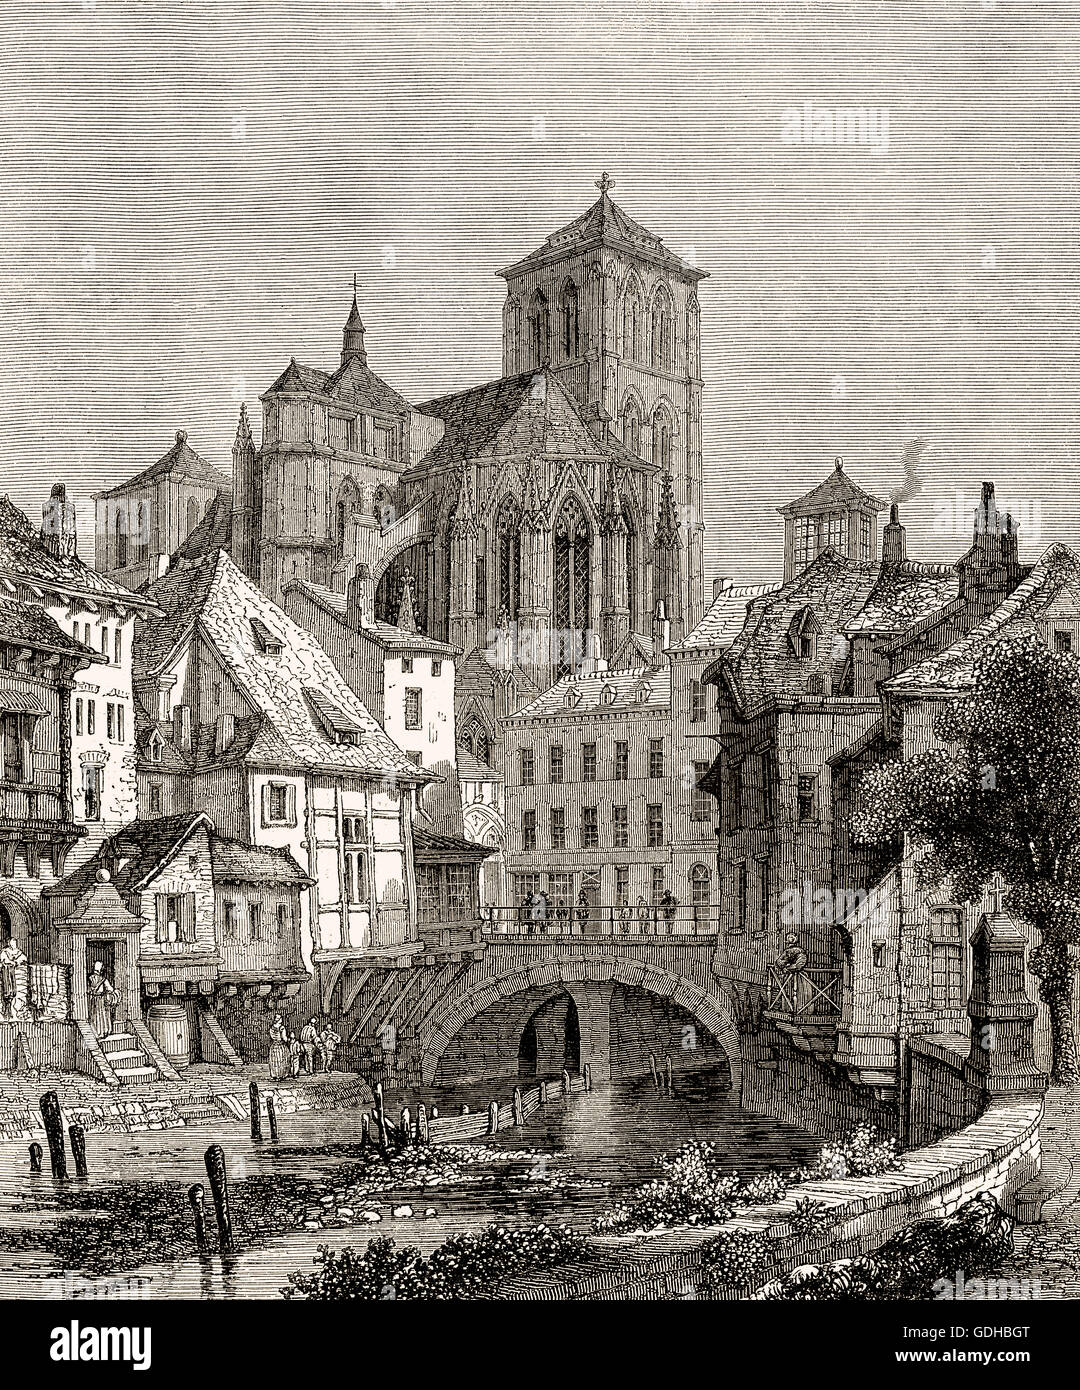 city-scape of Huy, a municipality of Belgium, 18th century Stock Photo